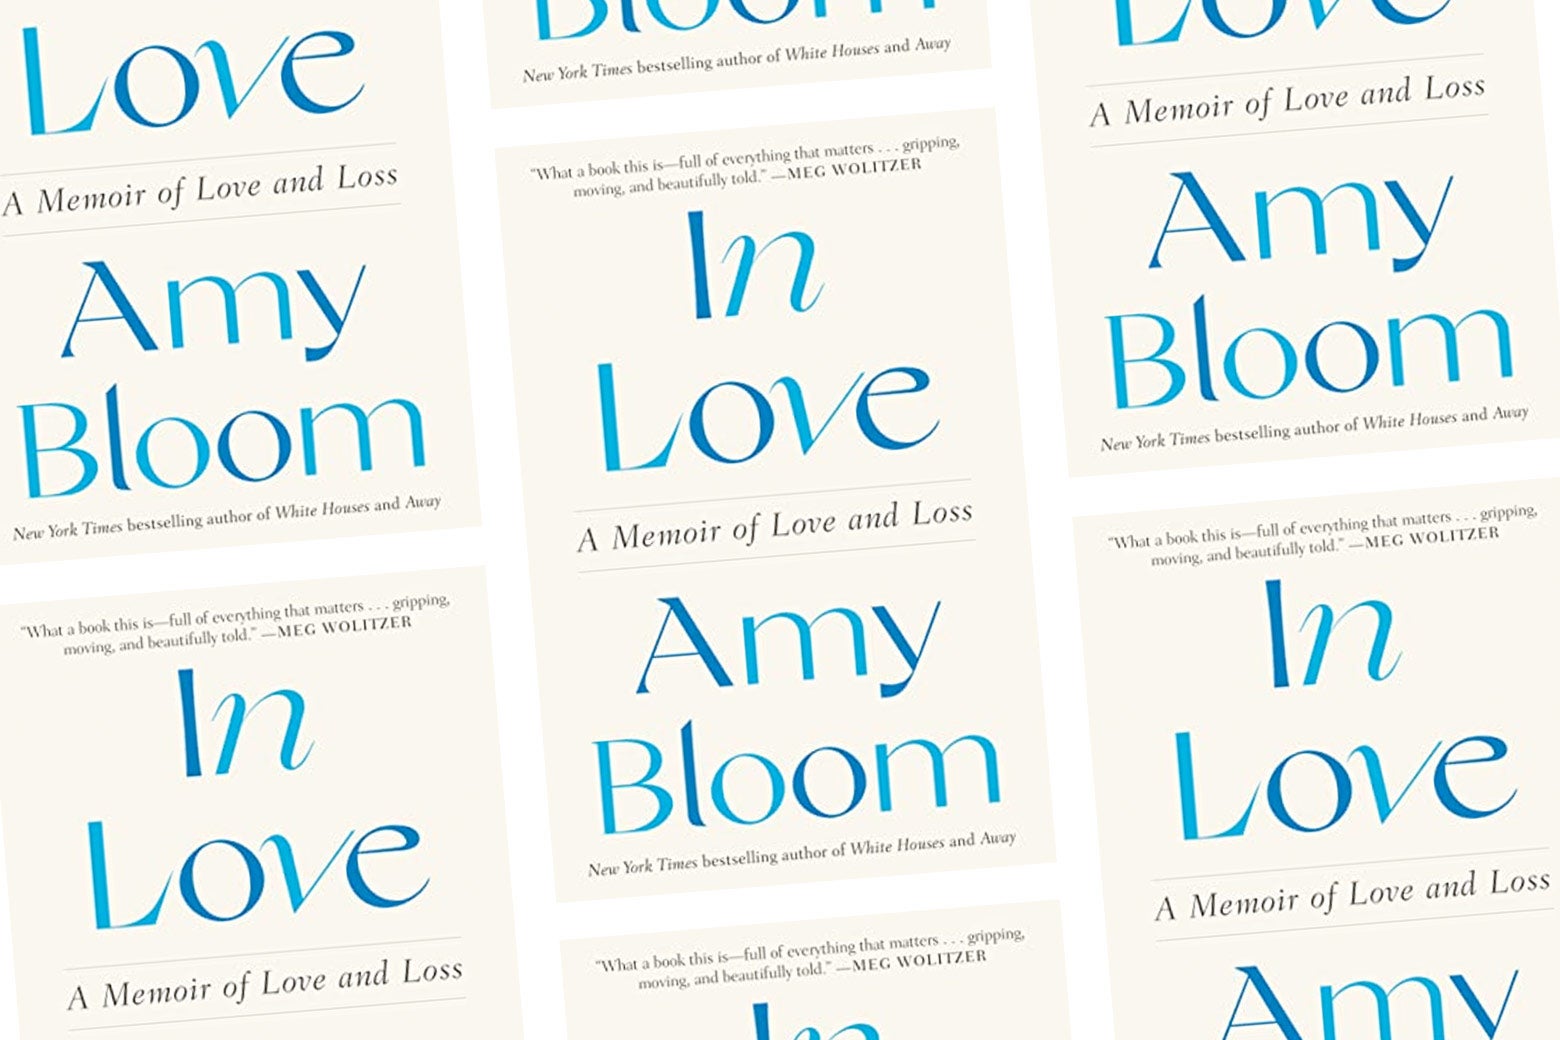 Mosaic comprising the cover of Amy Bloom's "In Love"